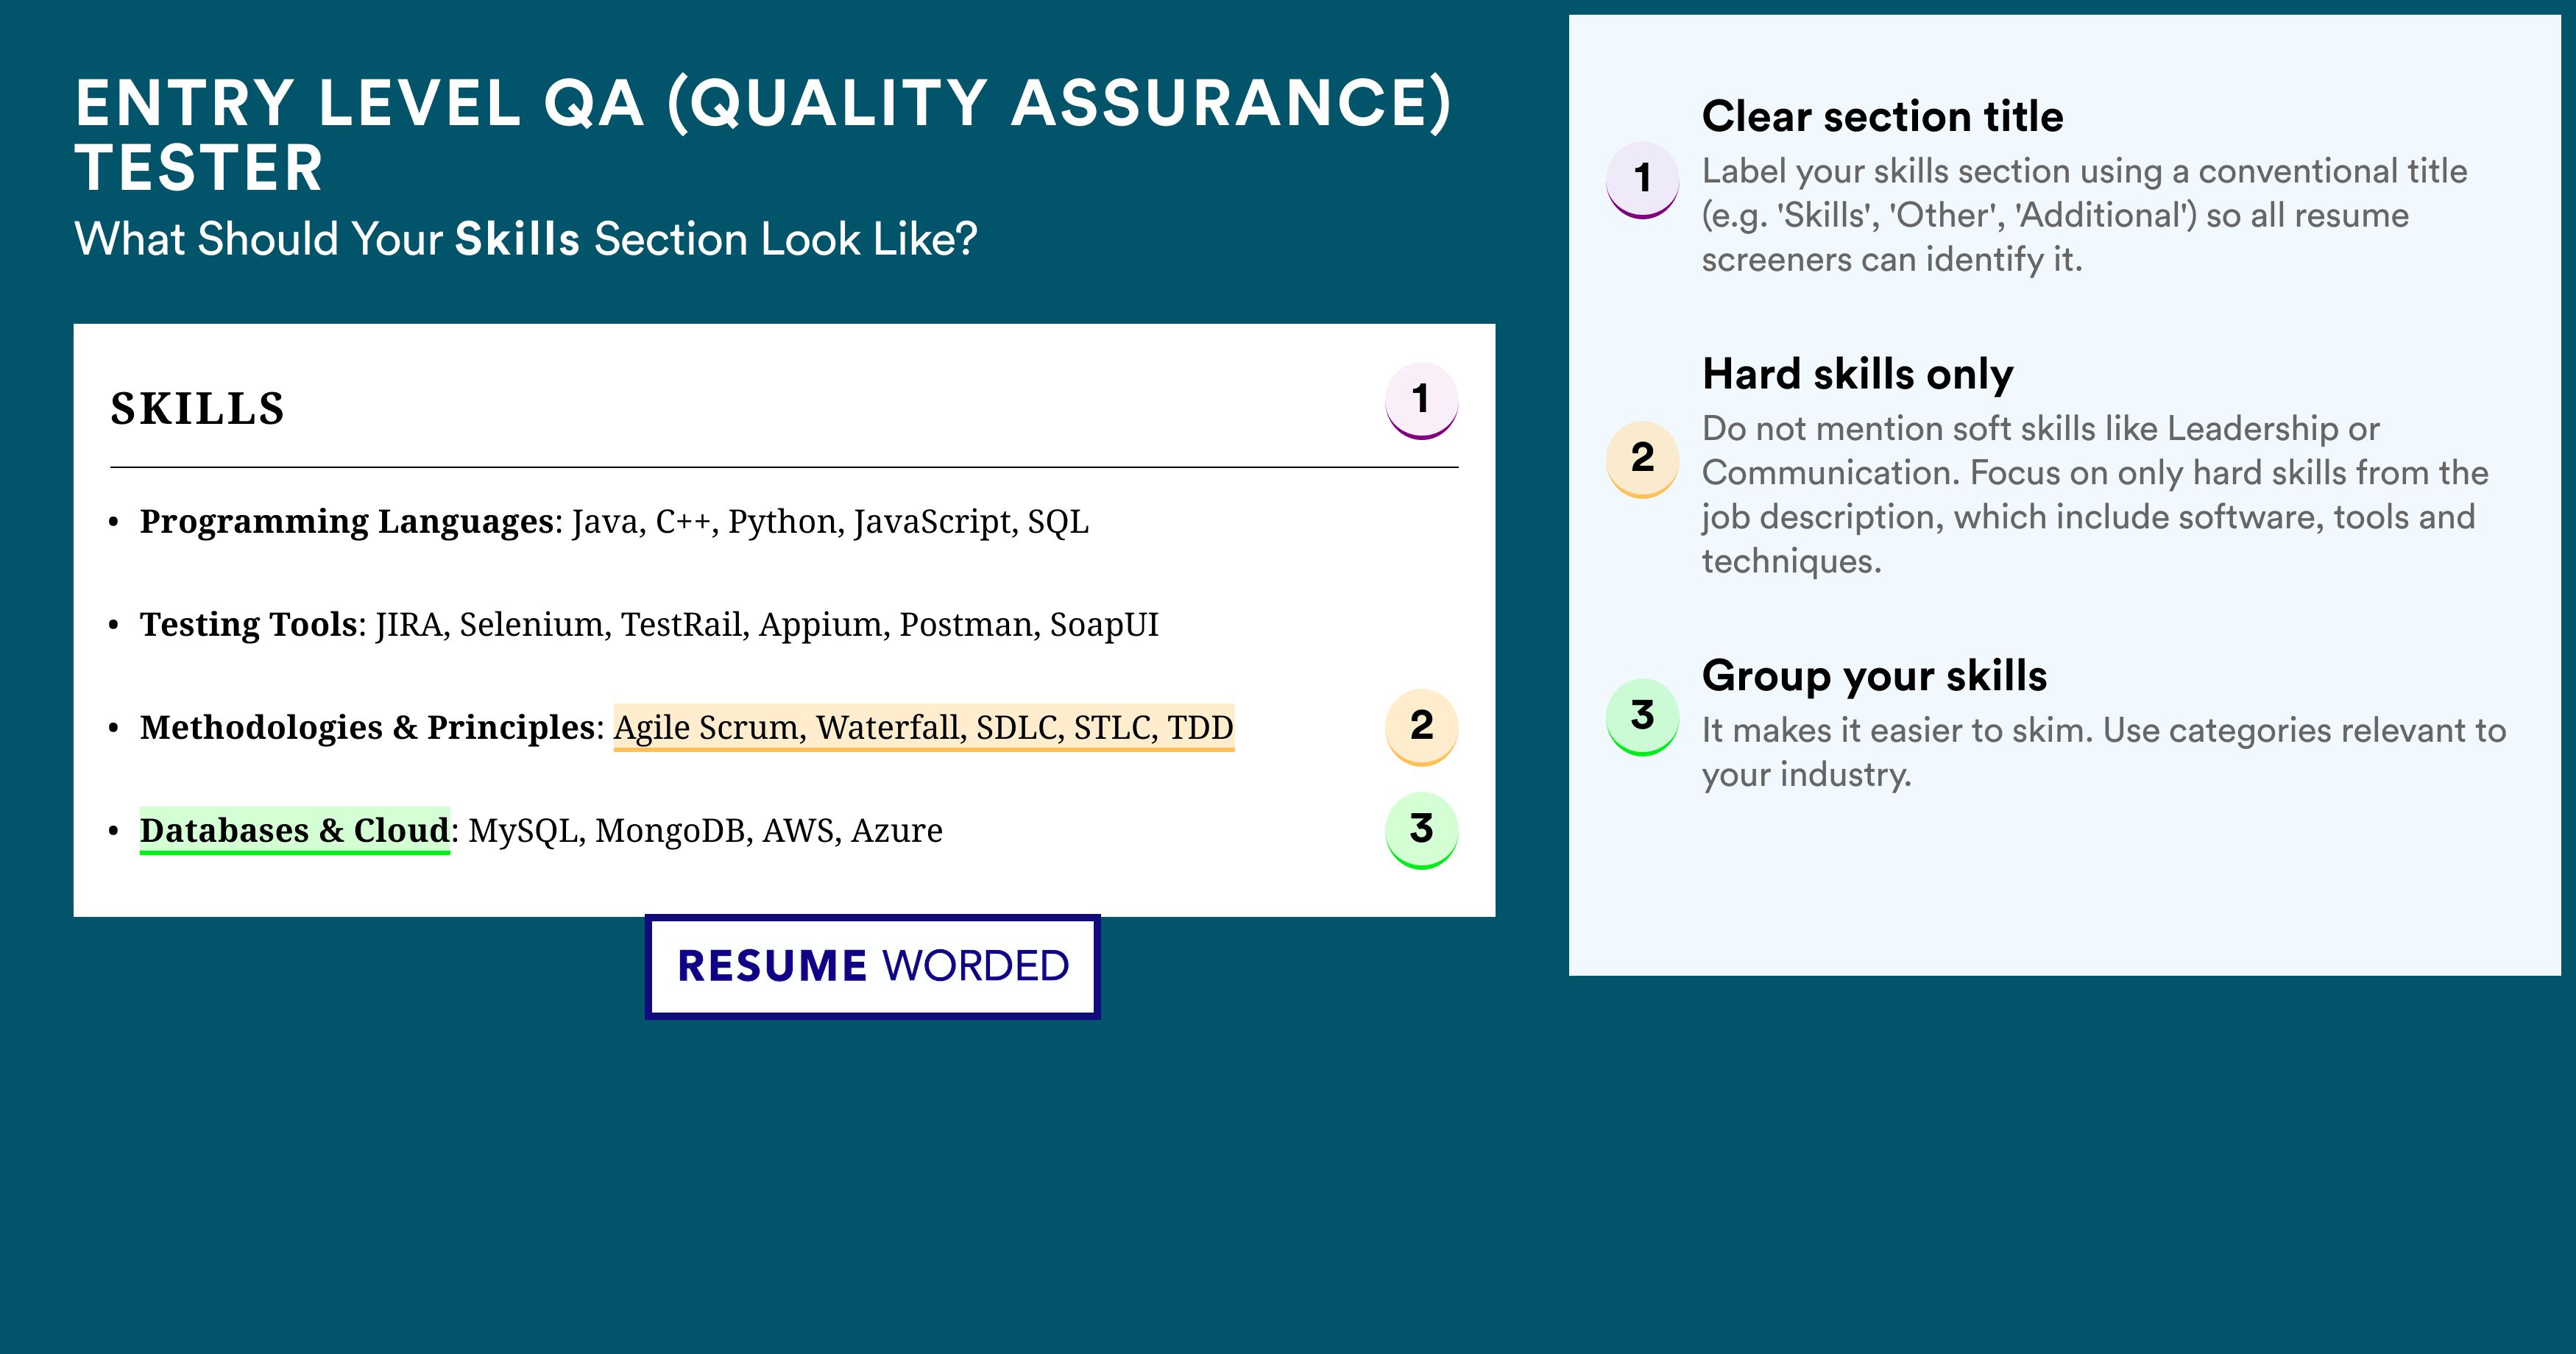 How To Write Your Skills Section - Entry Level QA (Quality Assurance) Tester Roles